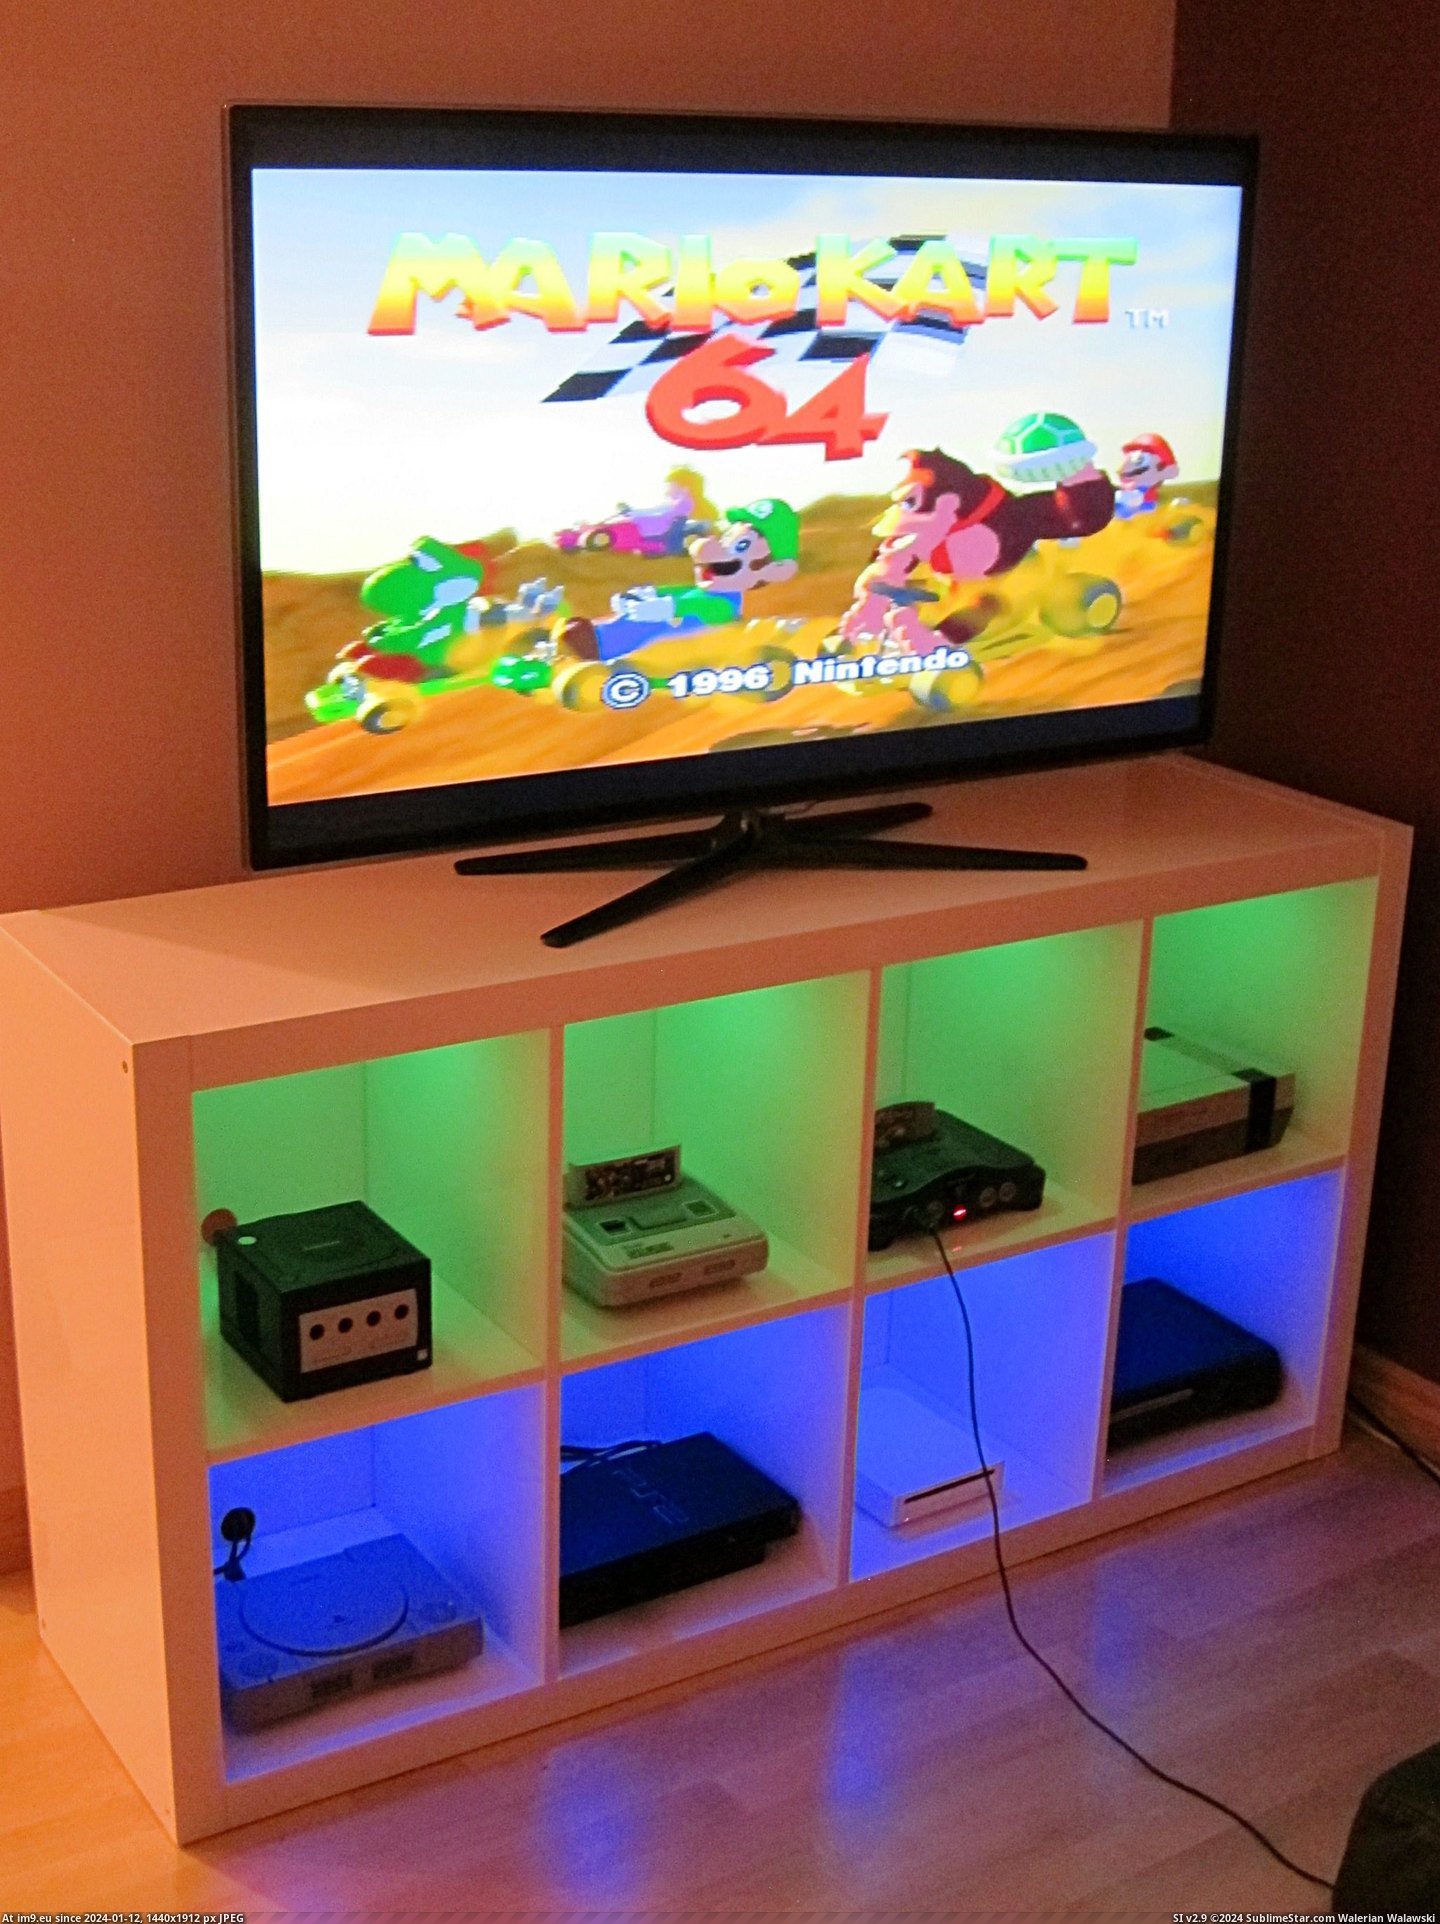 #Gaming #Happy #Finished #Product #Ikea #Bookshelf #Cabinet #Console #Modified [Gaming] I modified an Ikea bookshelf to make a console cabinet. Very happy with the finished product! Pic. (Obraz z album My r/GAMING favs))